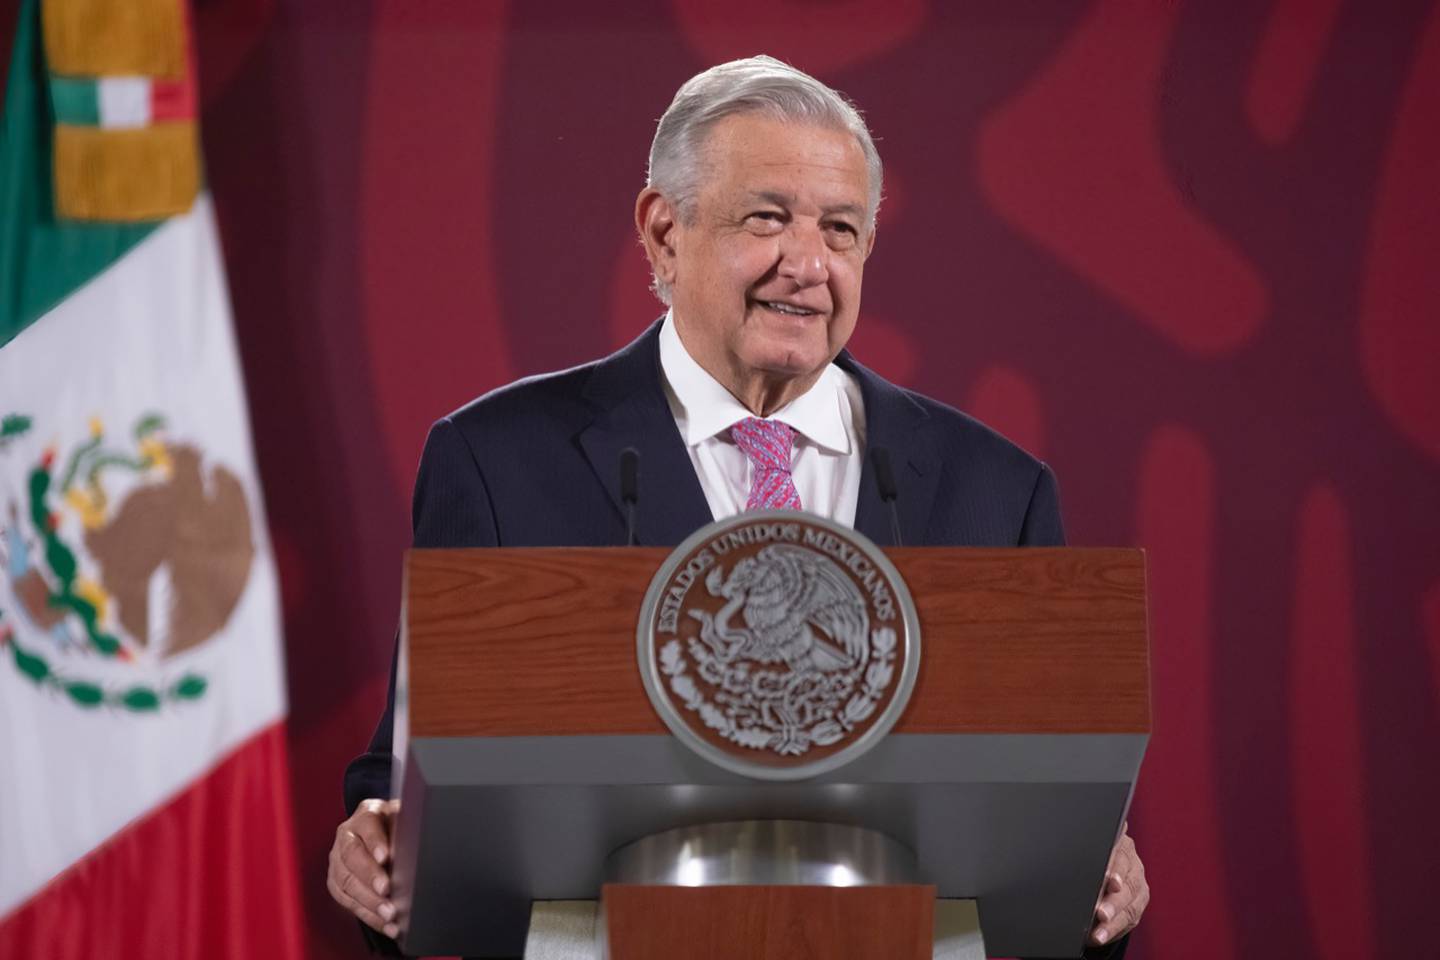 Mexico's President (known as AMLO) founded the Morena party after departing the Party of the Democratic Revolution (PRD), for which he unsuccessfully ran as presidential candidate in 2006 and 2012.dfd